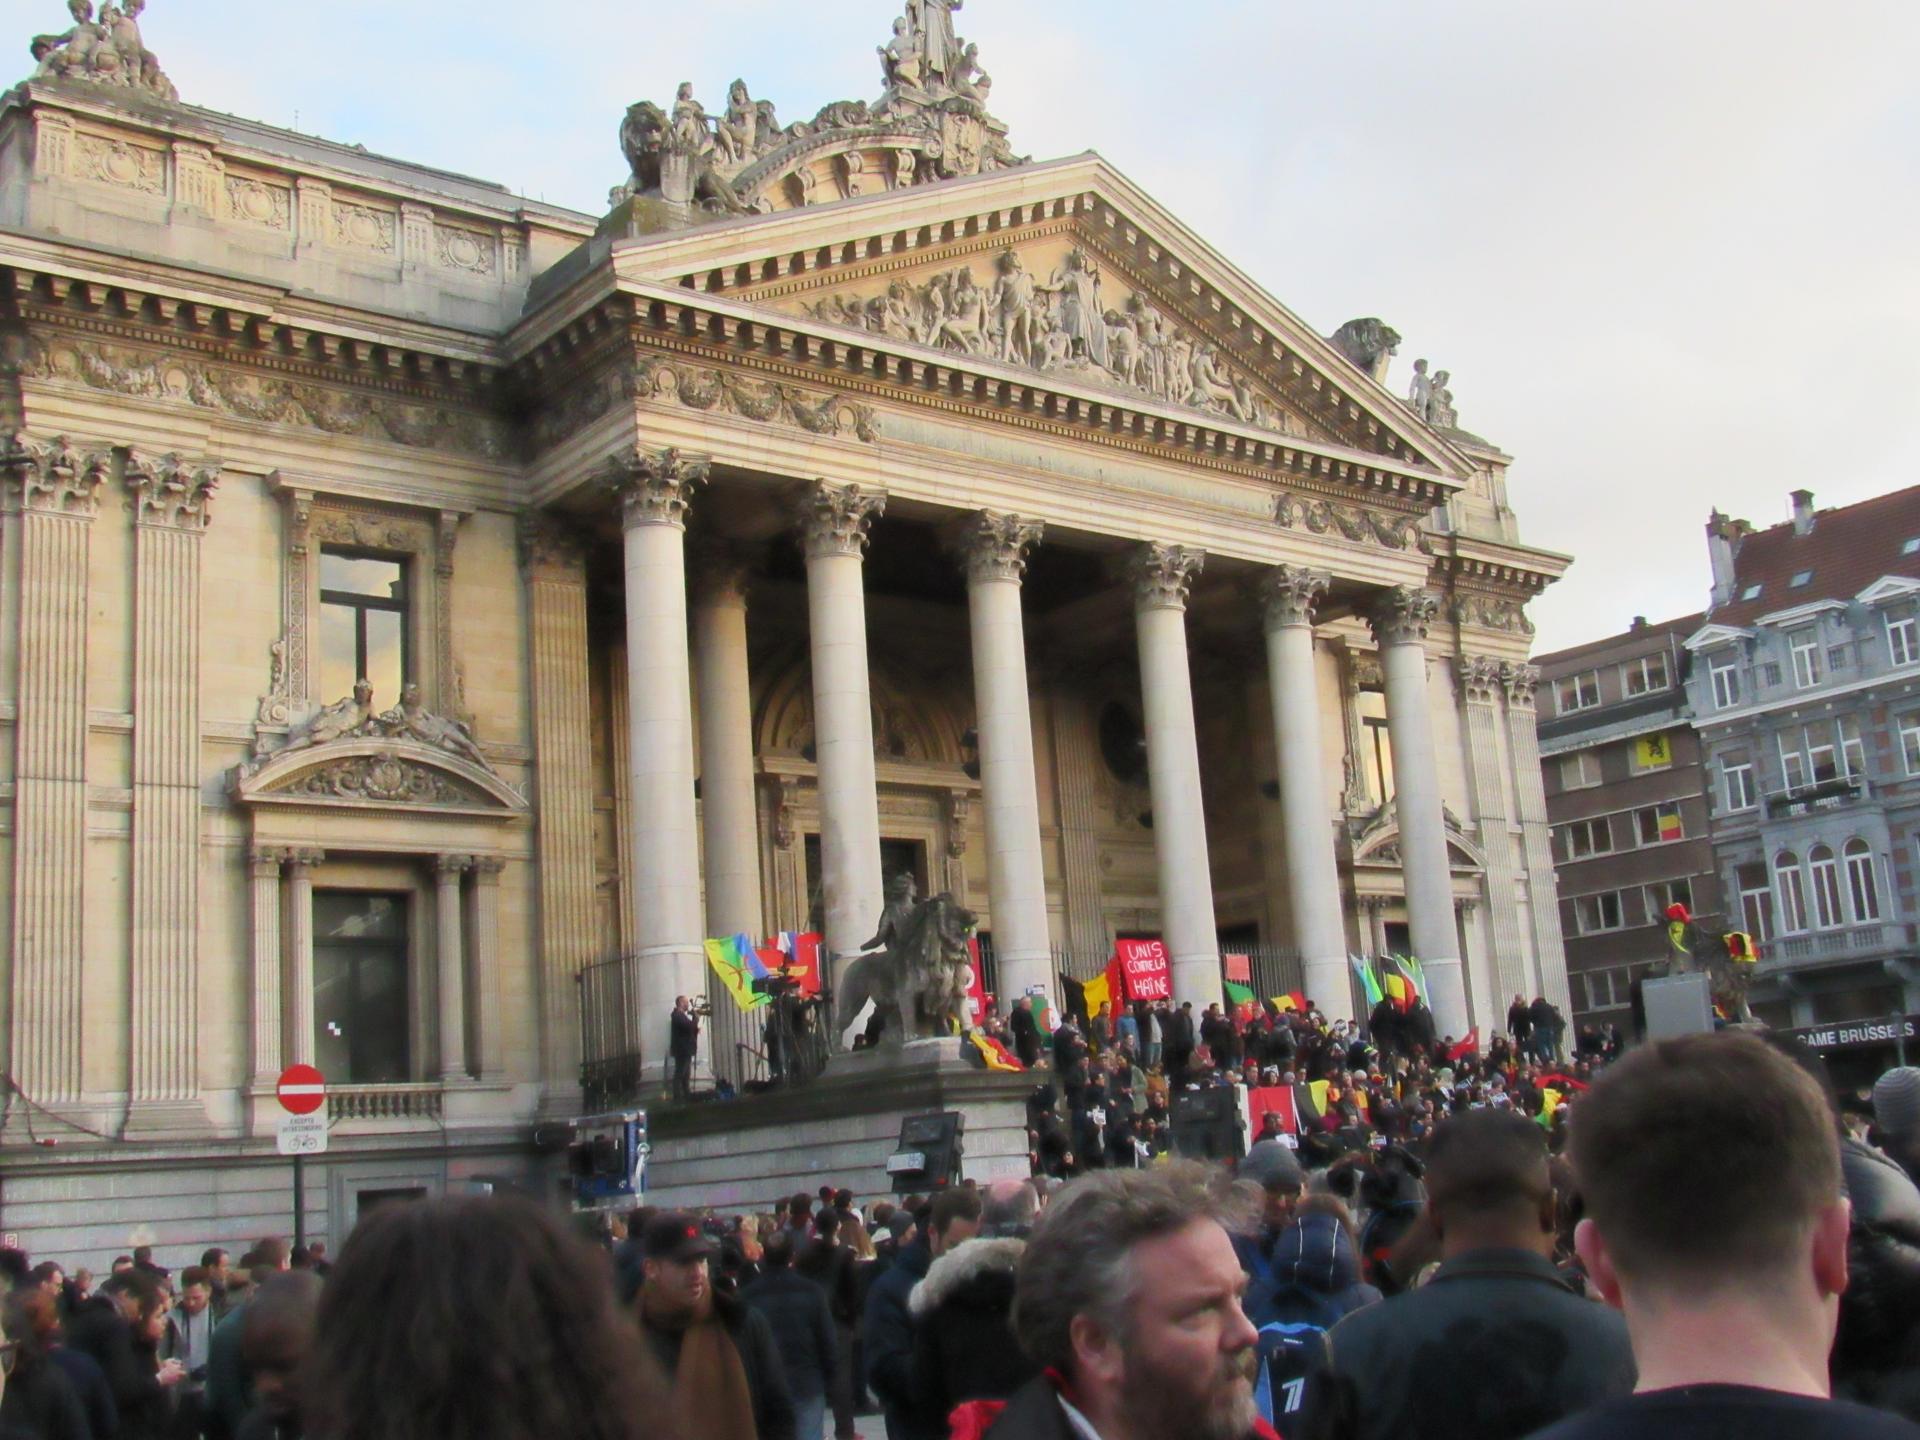 Crowds gather on the steps of the old Brussels stock exchange, Place de la Bourse.